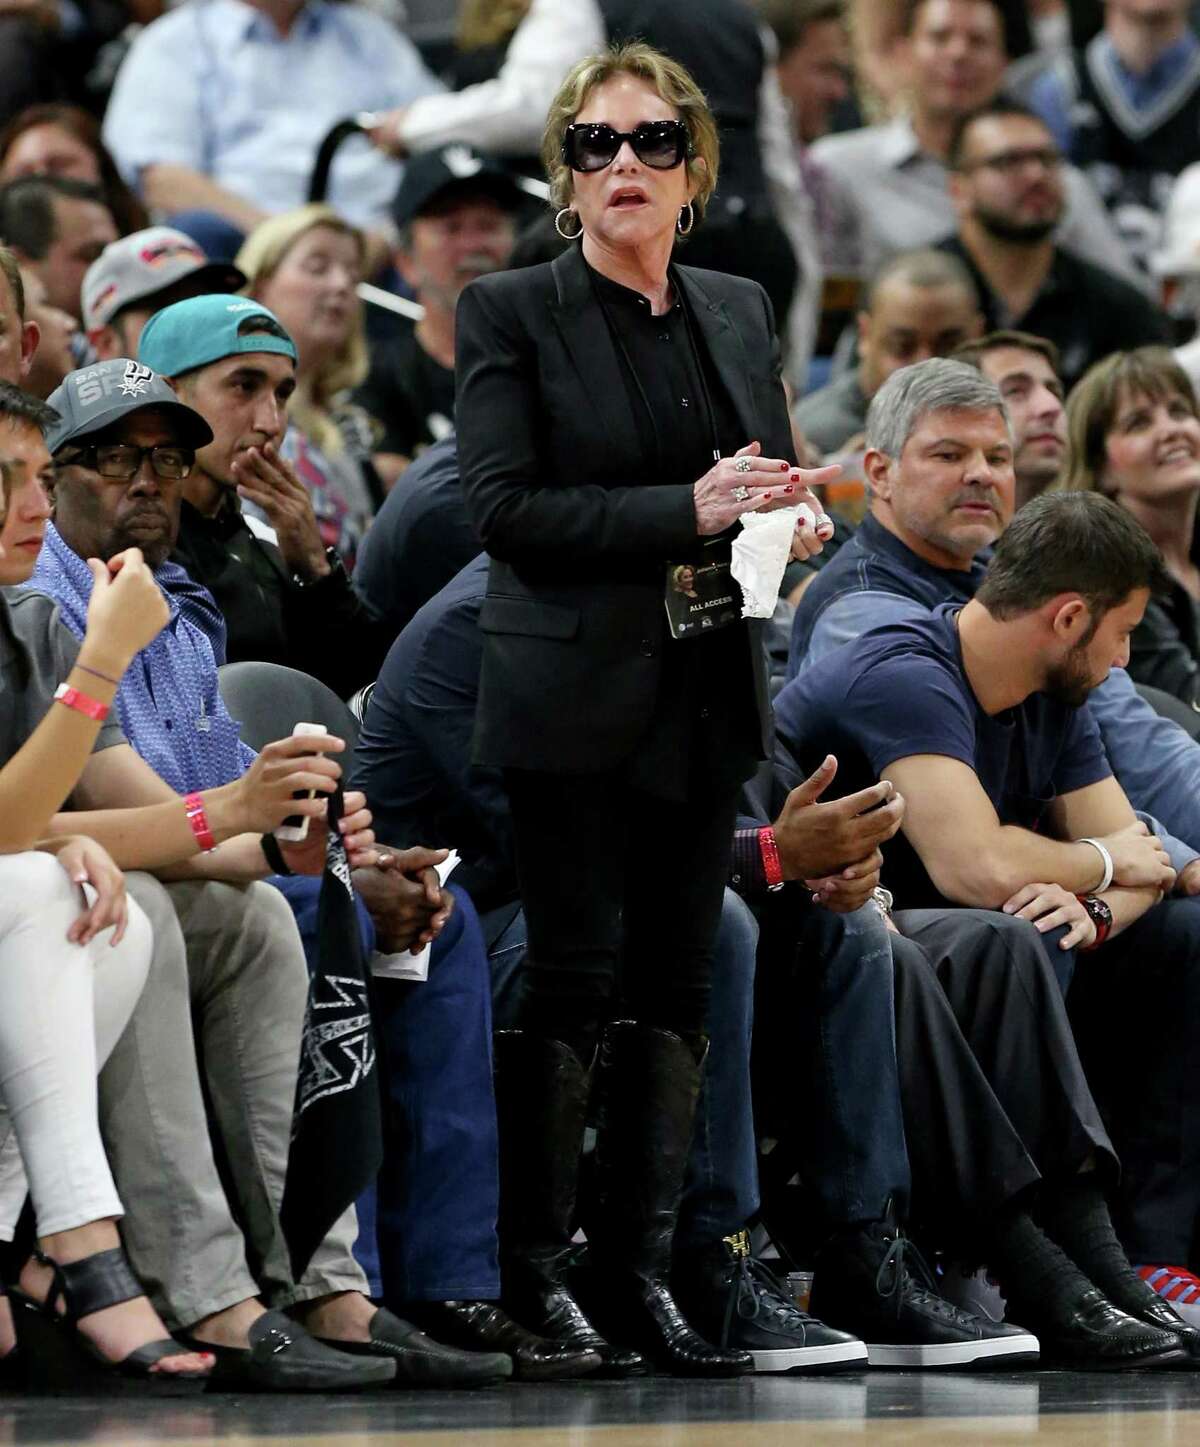 Spurs chairman and CEO Julianna Hawn Holt stands during second half action of Game 2 in the Western Conference semifinals between the San Antonio Spurs and Oklahoma City Thunder Monday May 2, 2016 at the AT&T Center. The Thunder won 98-97.